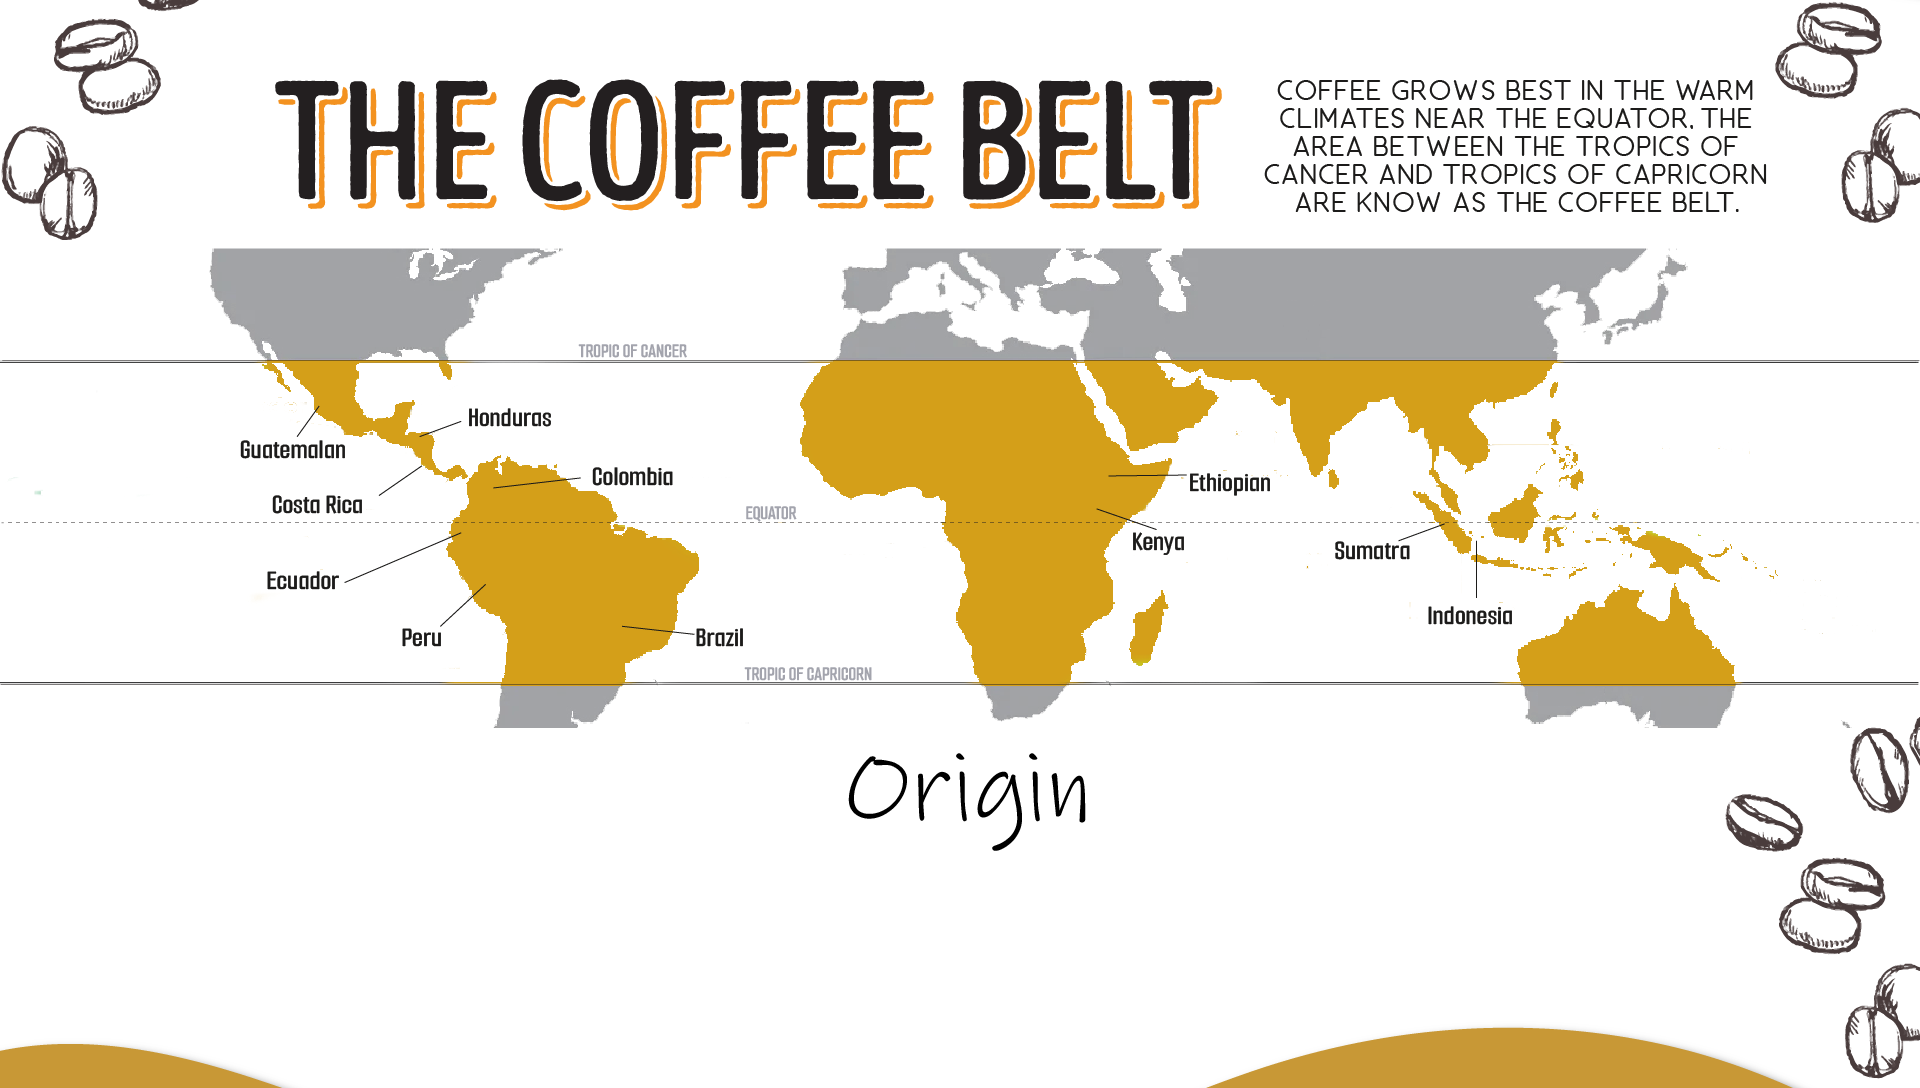 Coffee grows best in the warm climates near the equator, The Area between the Tropics of Cancer and Tropics of Capricorn are know as THE cOFFEE bELT.